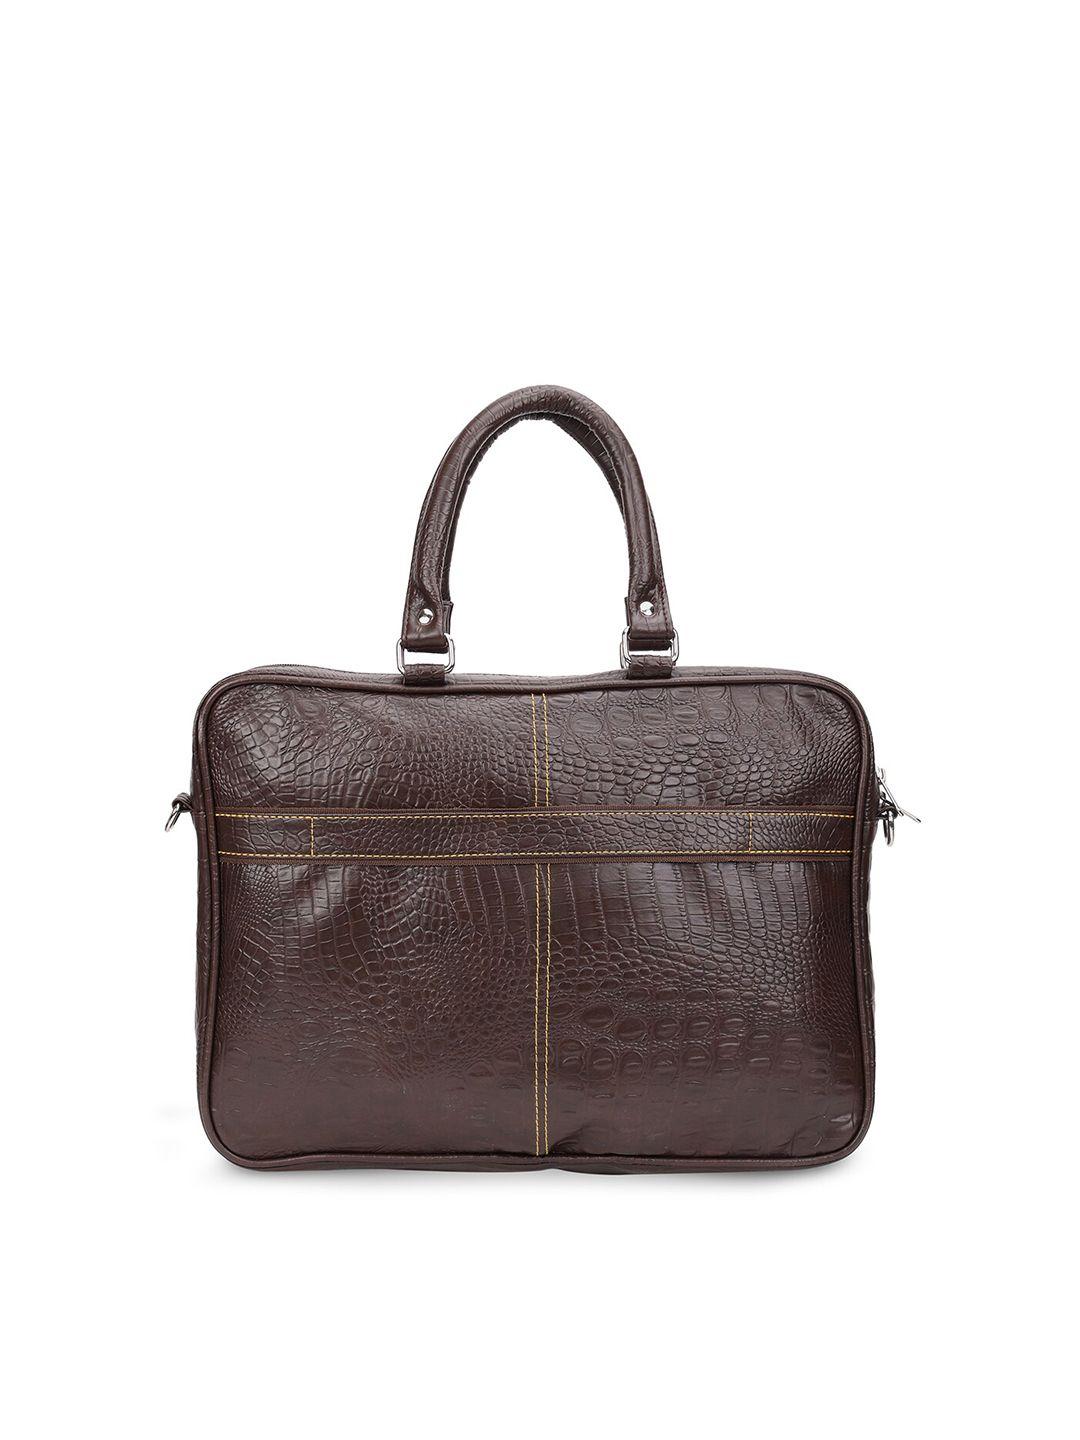 mboss unisex brown leather textured laptop bag